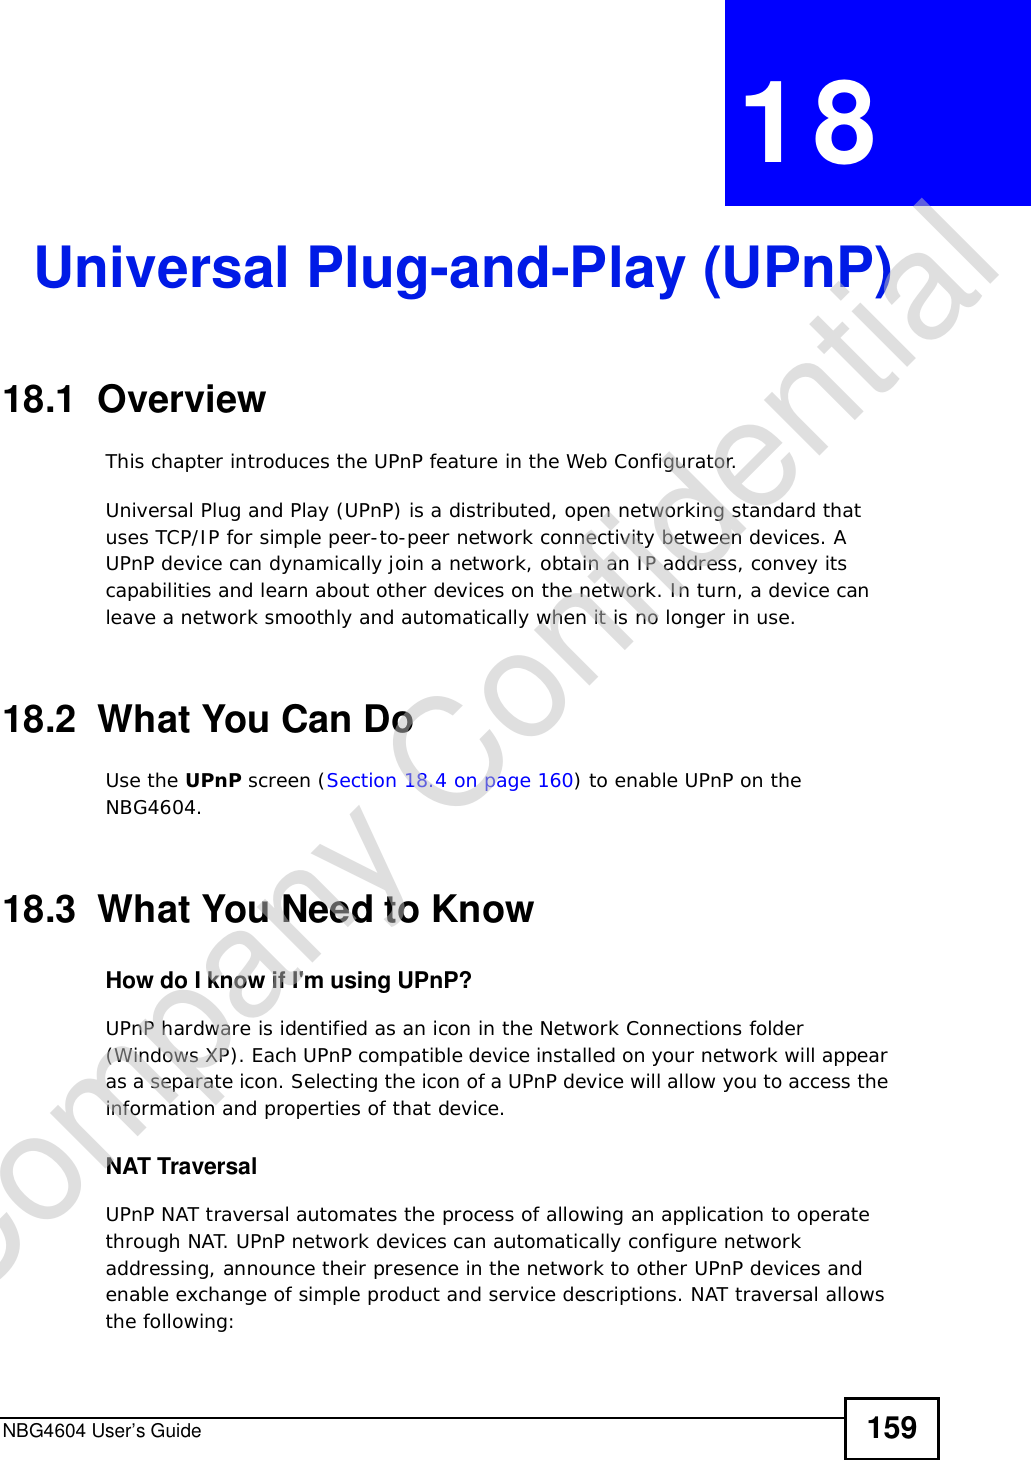 NBG4604 User’s Guide 159CHAPTER 18Universal Plug-and-Play (UPnP)18.1  Overview This chapter introduces the UPnP feature in the Web Configurator.Universal Plug and Play (UPnP) is a distributed, open networking standard that uses TCP/IP for simple peer-to-peer network connectivity between devices. A UPnP device can dynamically join a network, obtain an IP address, convey its capabilities and learn about other devices on the network. In turn, a device can leave a network smoothly and automatically when it is no longer in use.18.2  What You Can DoUse the UPnP screen (Section 18.4 on page 160) to enable UPnP on the NBG4604.18.3  What You Need to KnowHow do I know if I&apos;m using UPnP? UPnP hardware is identified as an icon in the Network Connections folder (Windows XP). Each UPnP compatible device installed on your network will appear as a separate icon. Selecting the icon of a UPnP device will allow you to access the information and properties of that device. NAT TraversalUPnP NAT traversal automates the process of allowing an application to operate through NAT. UPnP network devices can automatically configure network addressing, announce their presence in the network to other UPnP devices and enable exchange of simple product and service descriptions. NAT traversal allows the following:Company Confidential